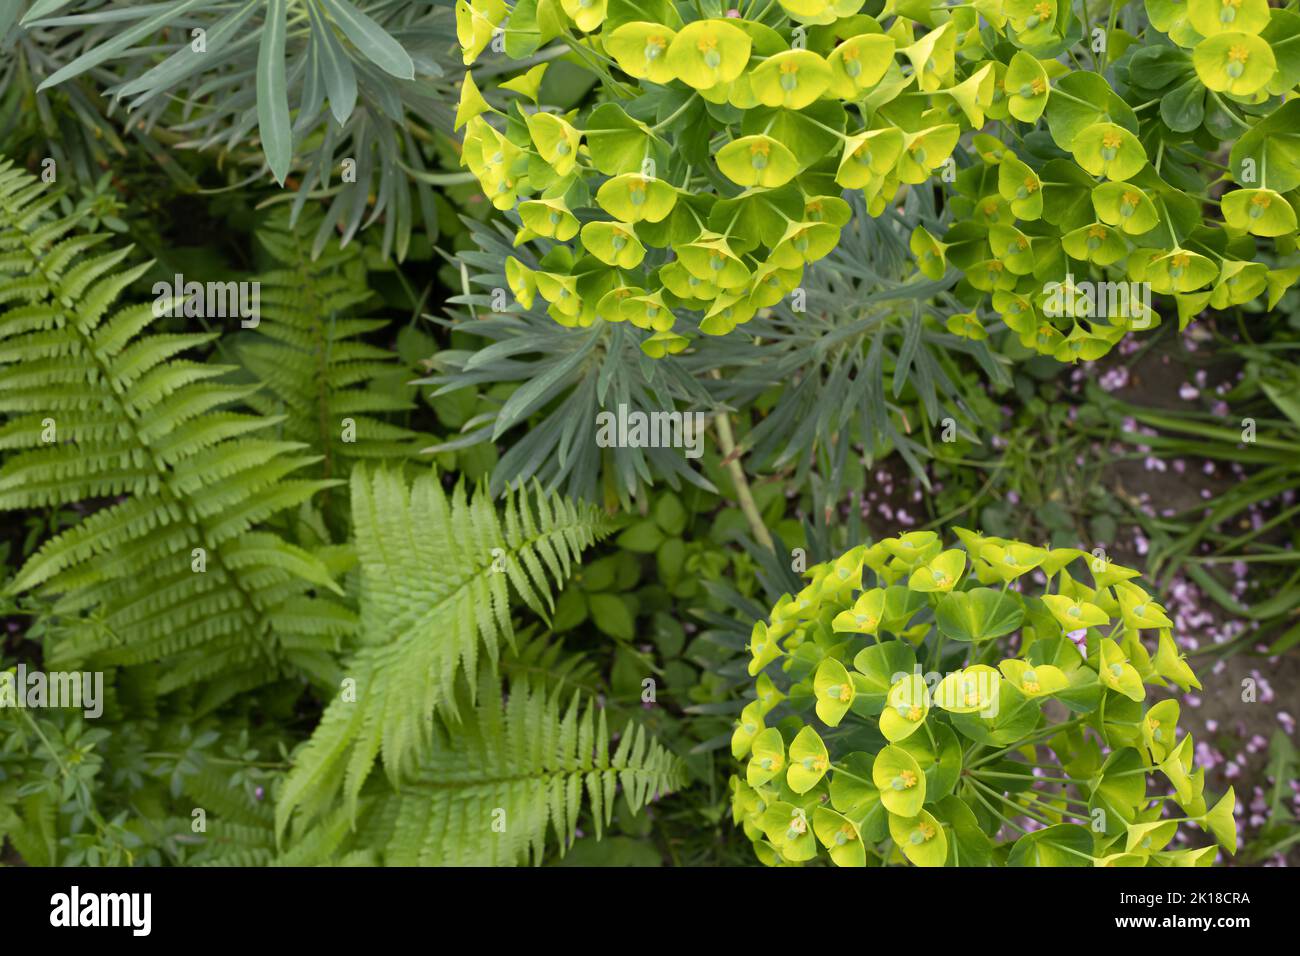 Wonderful background of various green plants. Euphorbia lathyris, Cercis siliquastrum and other plants in nature. Stock Photo